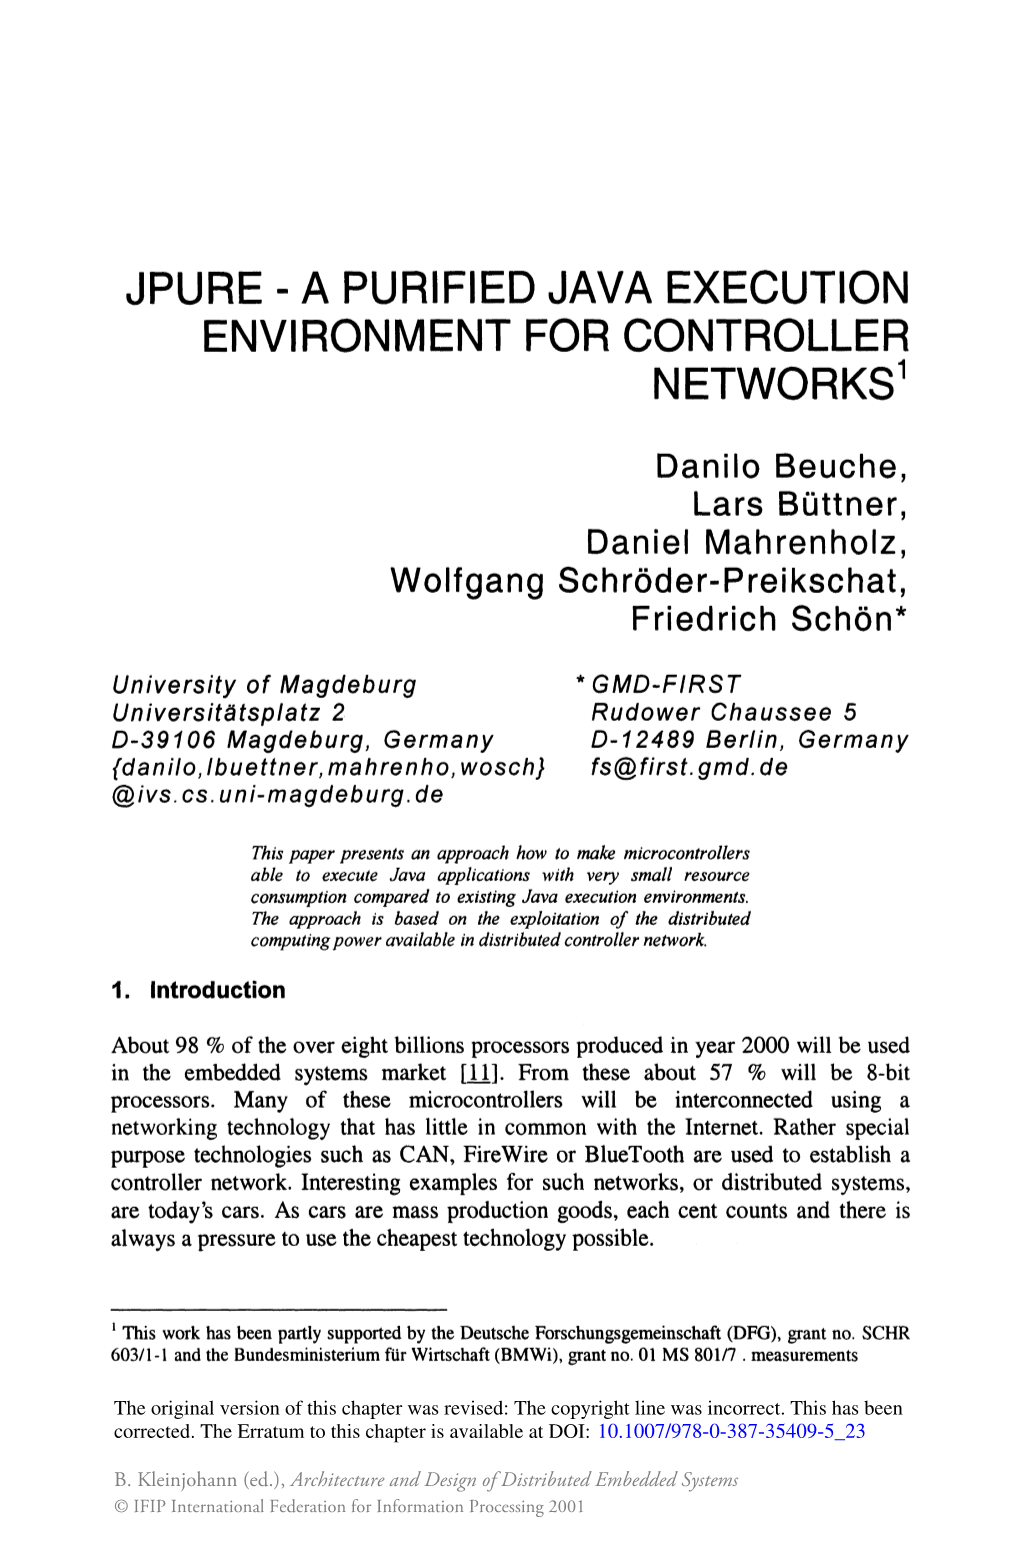 JPURE—A Purified Java Execution Environment for Controller Networks